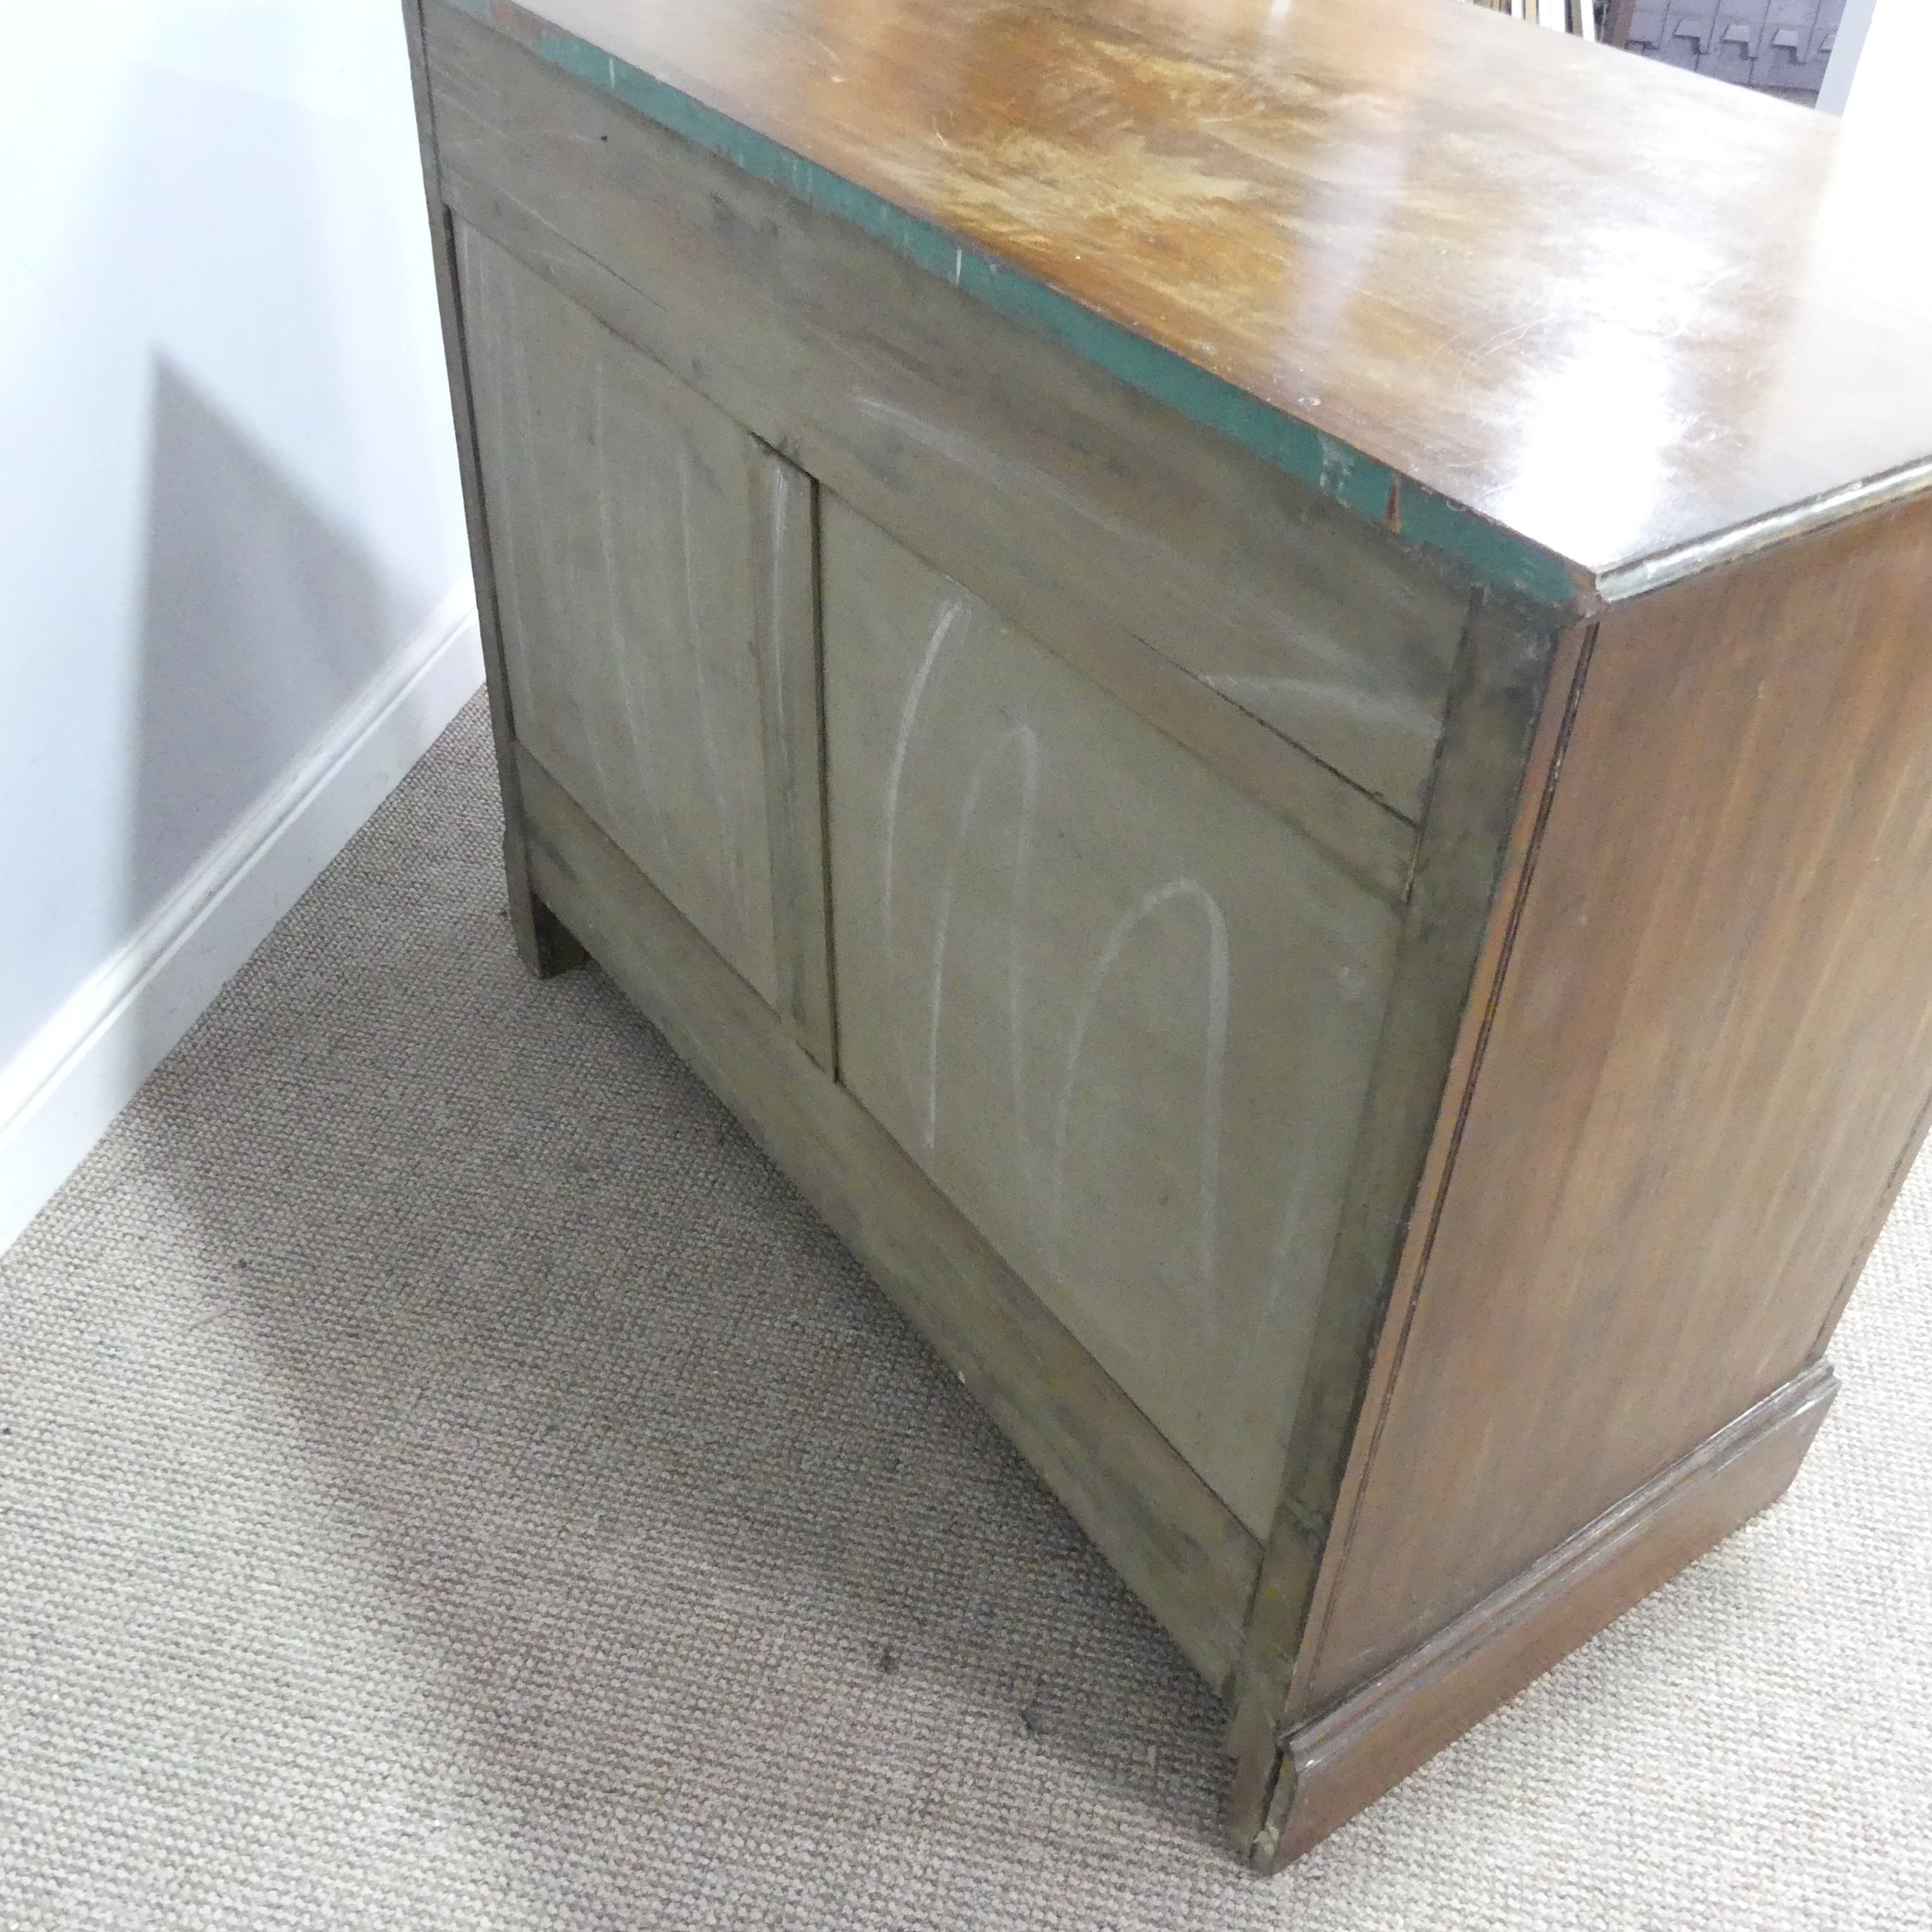 An Edwardian mahogany Chest of drawers, formerly a dressing chest, lock stamped 'H.L L', W 107 cm - Image 5 of 5